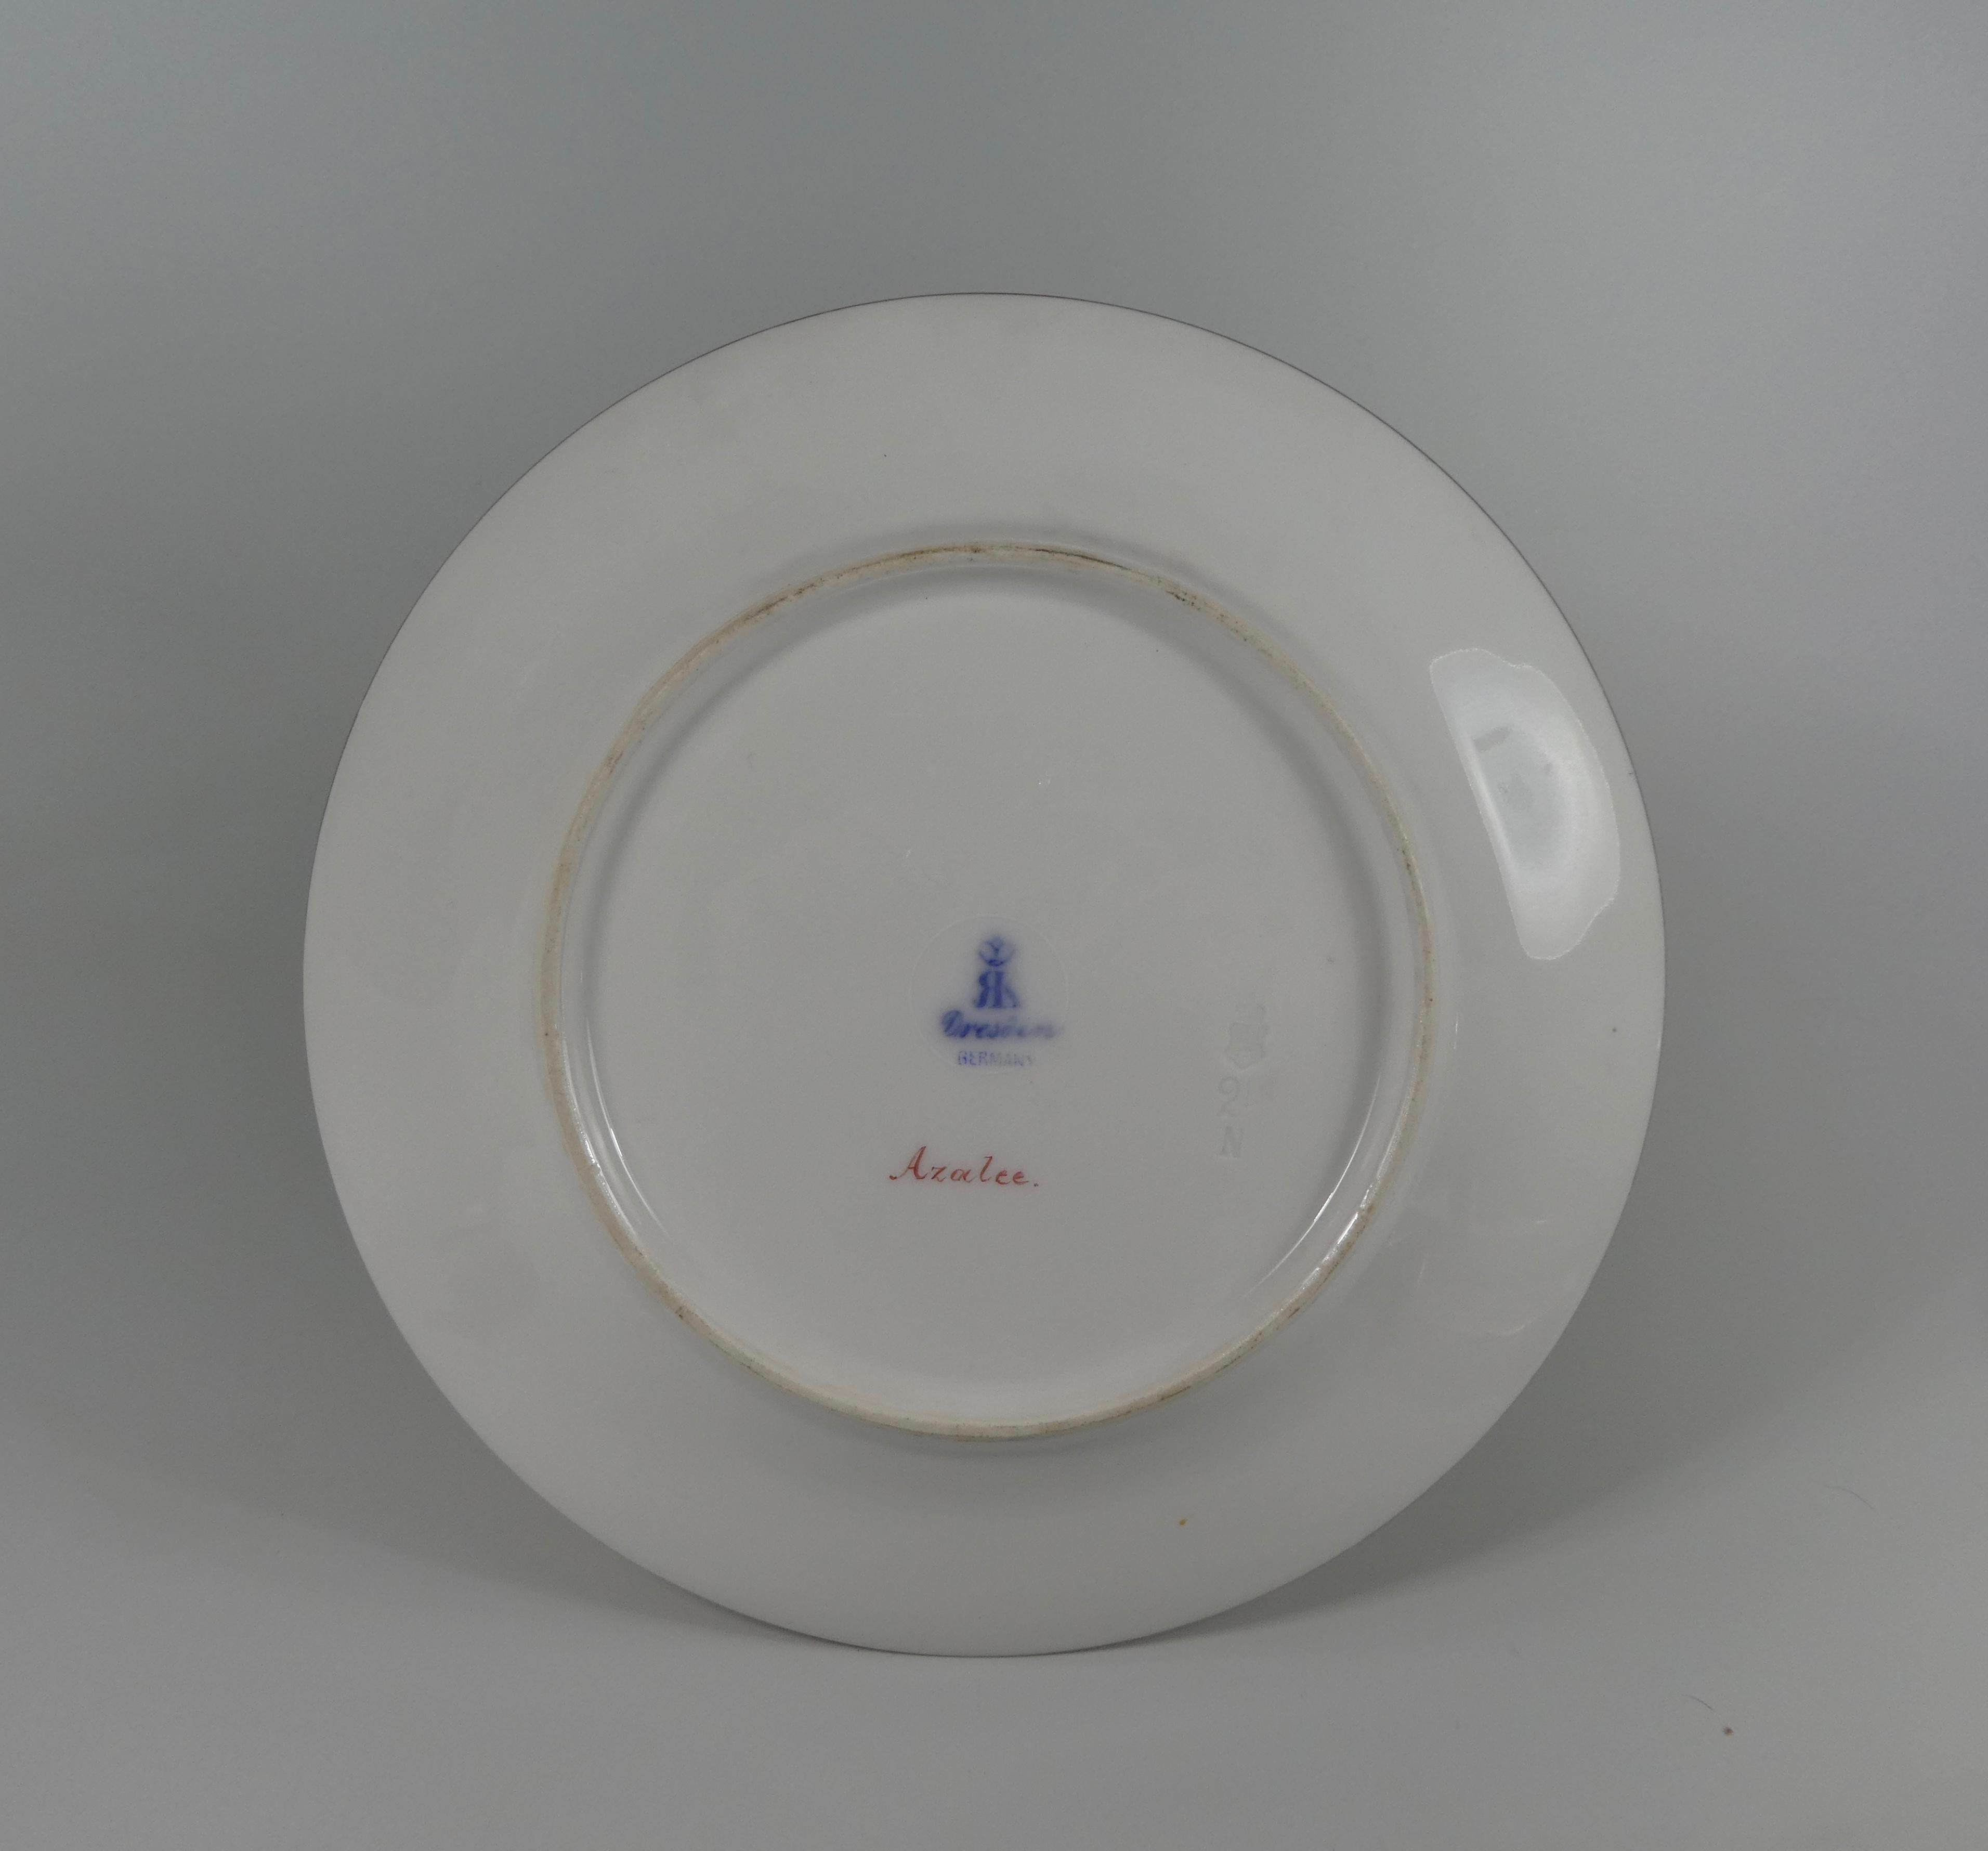 Fired ‘Vienna’ Style Porcelain Plate, ‘Azalee’, Signed C. Kiesel, circa 1900